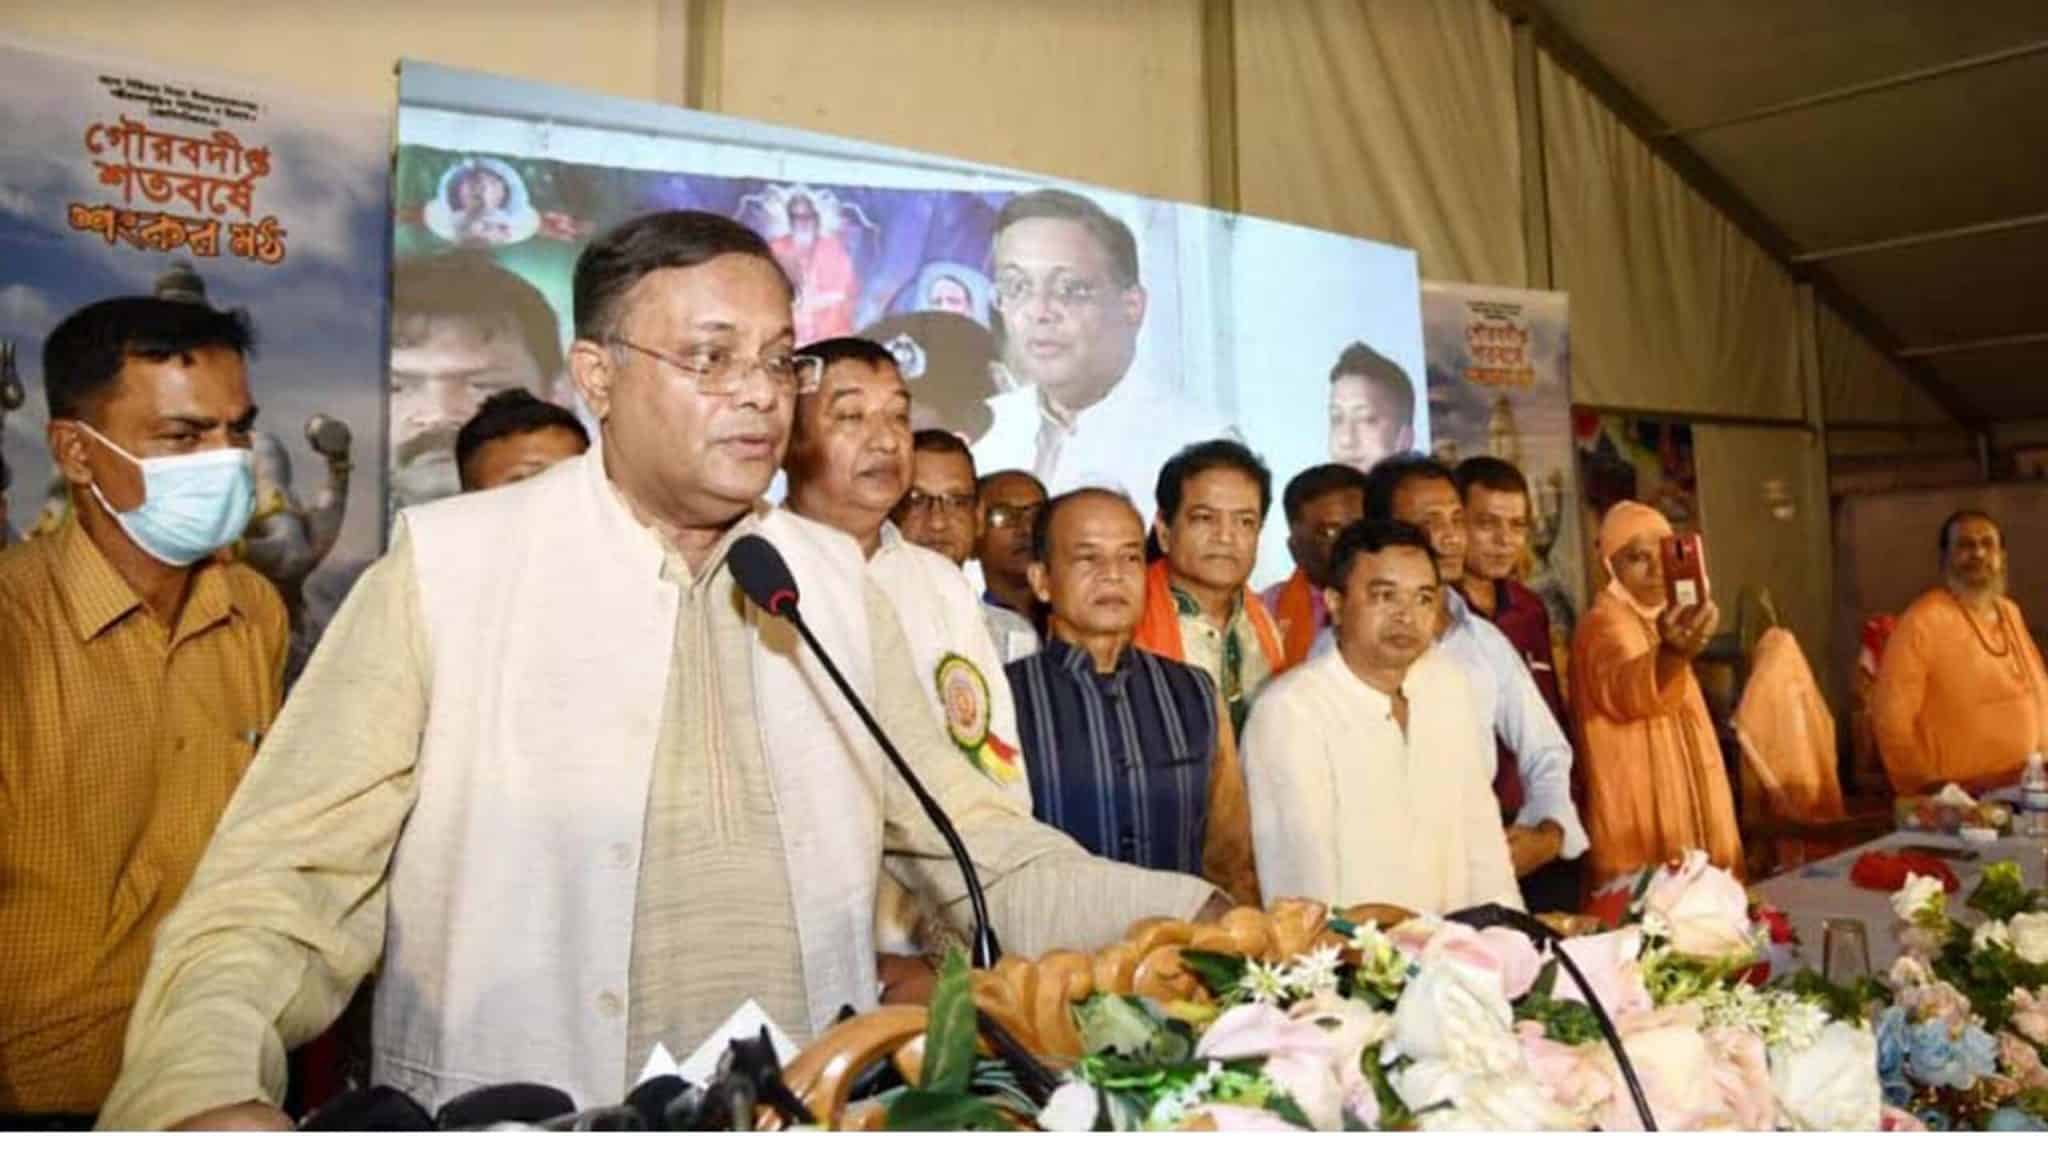 BNP has no respect for court, law: Hasan